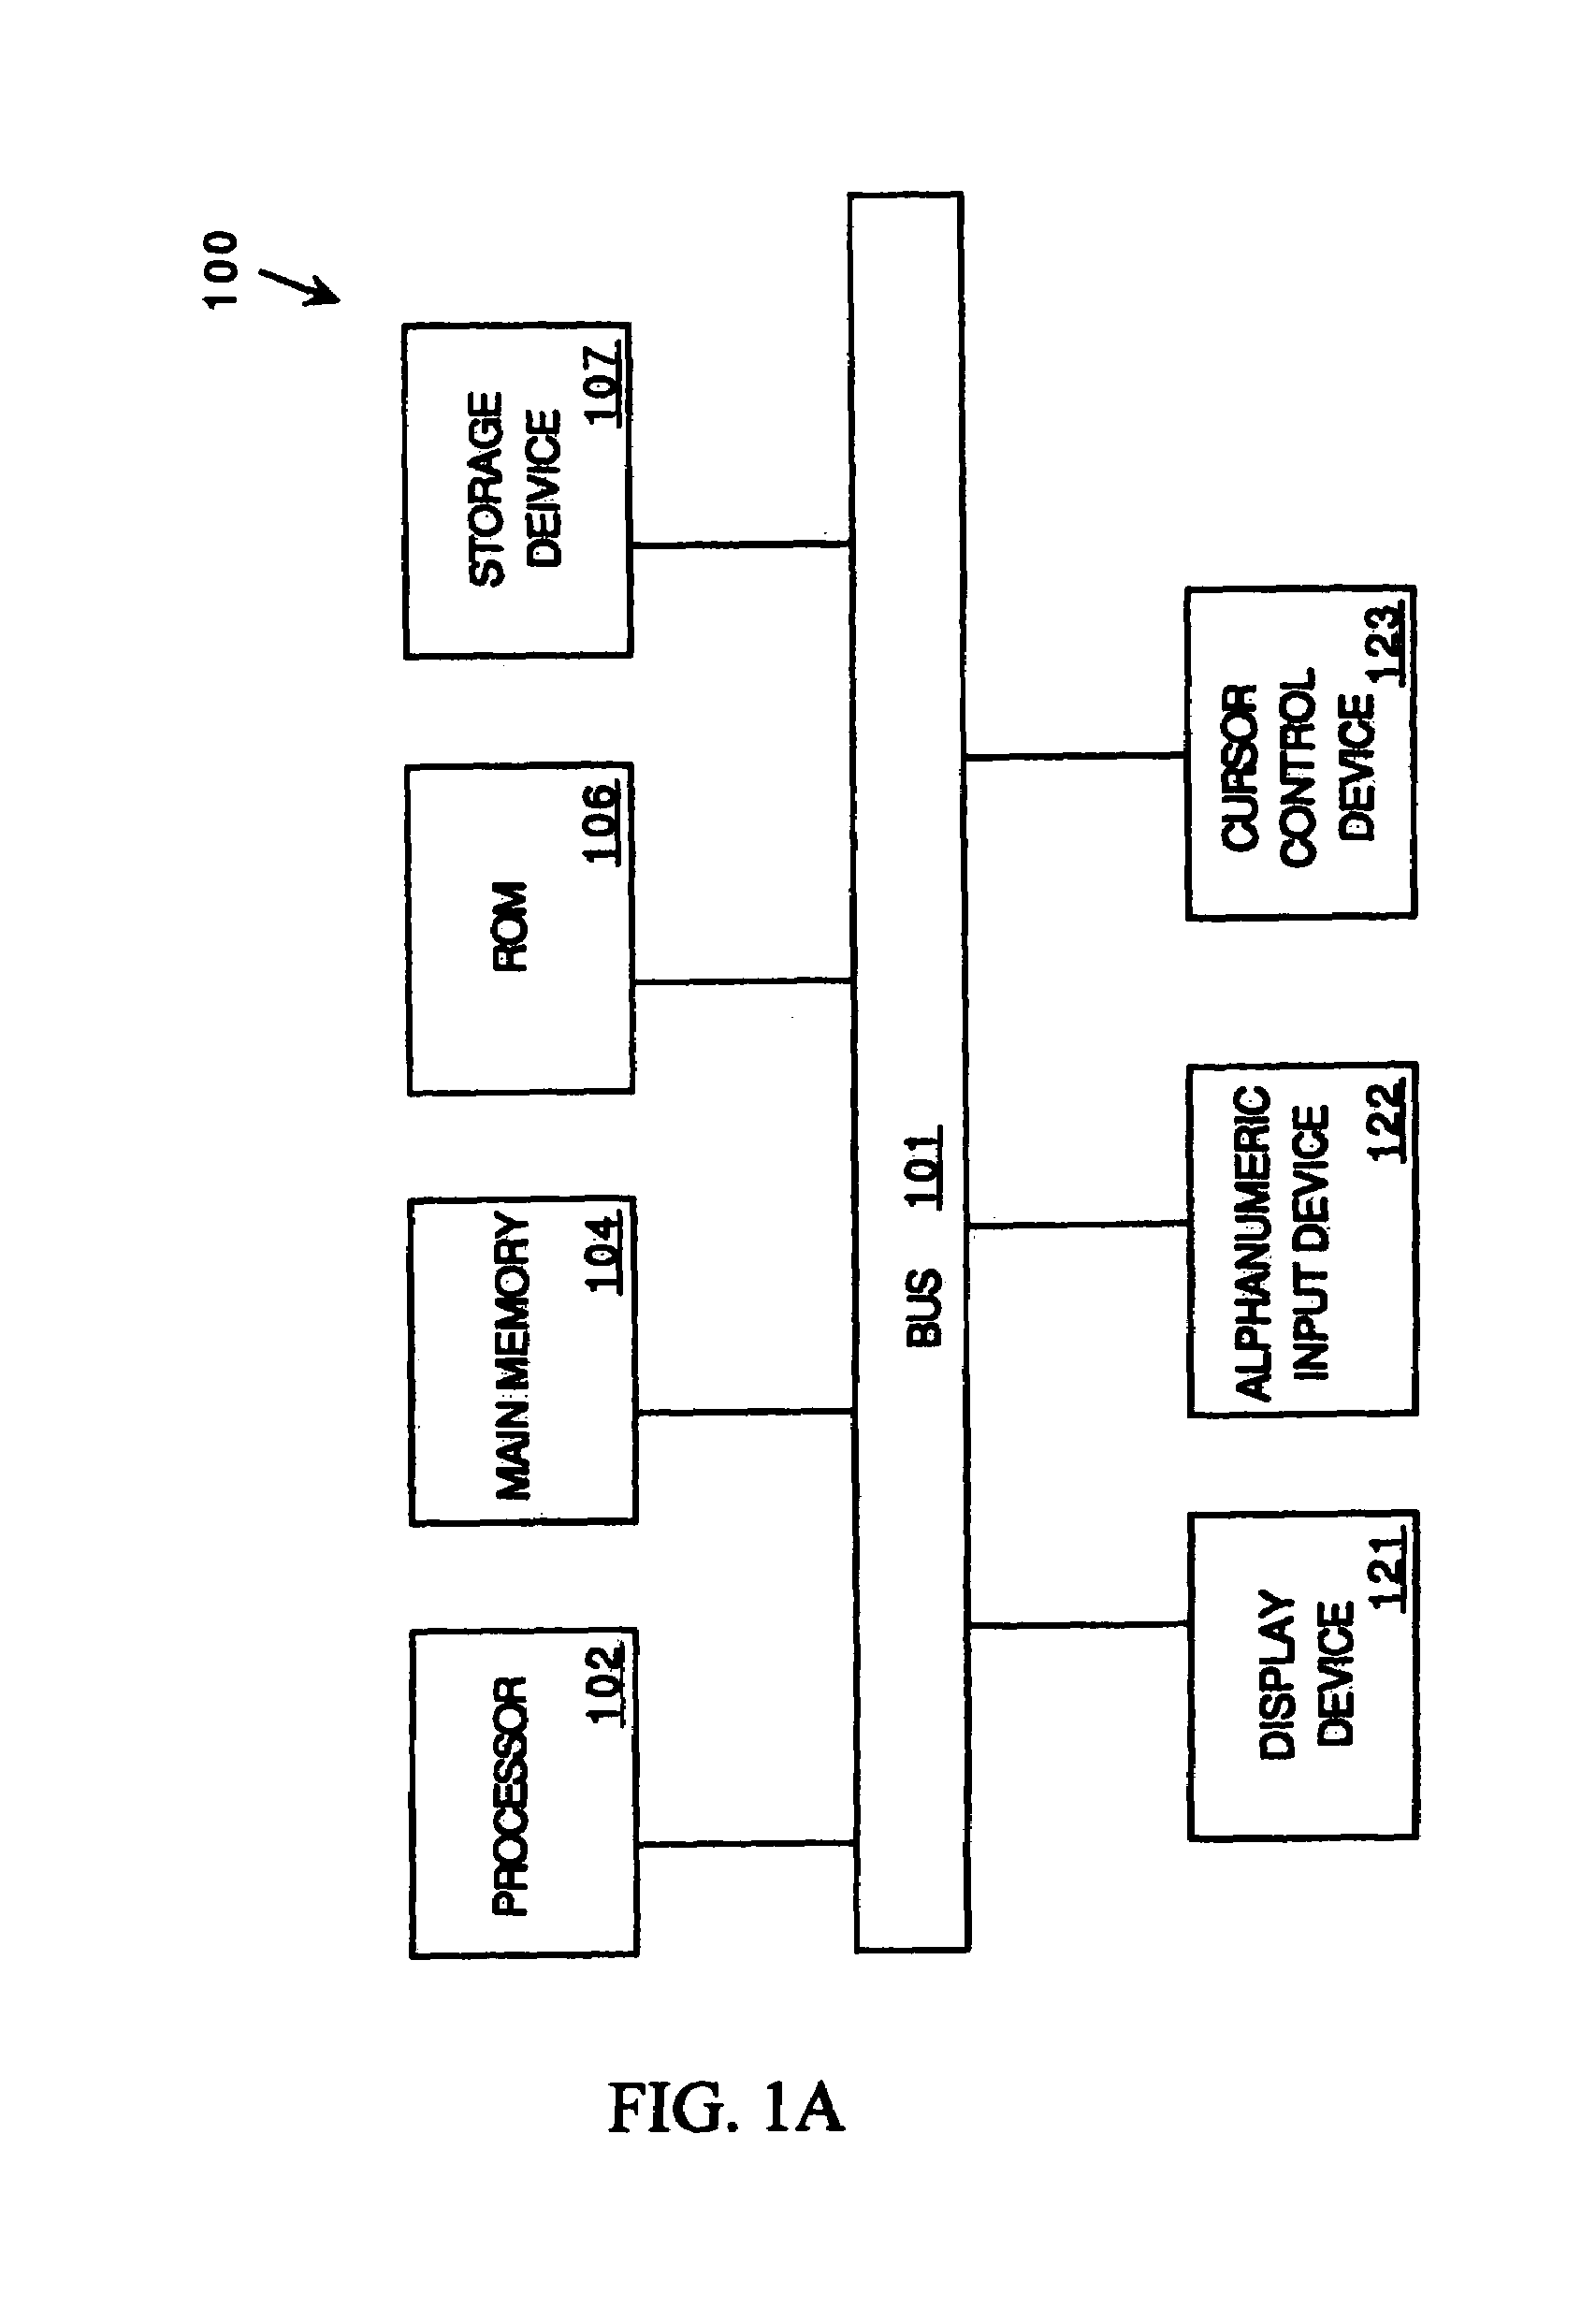 Two dimensional data eye centering for source synchronous data transfers